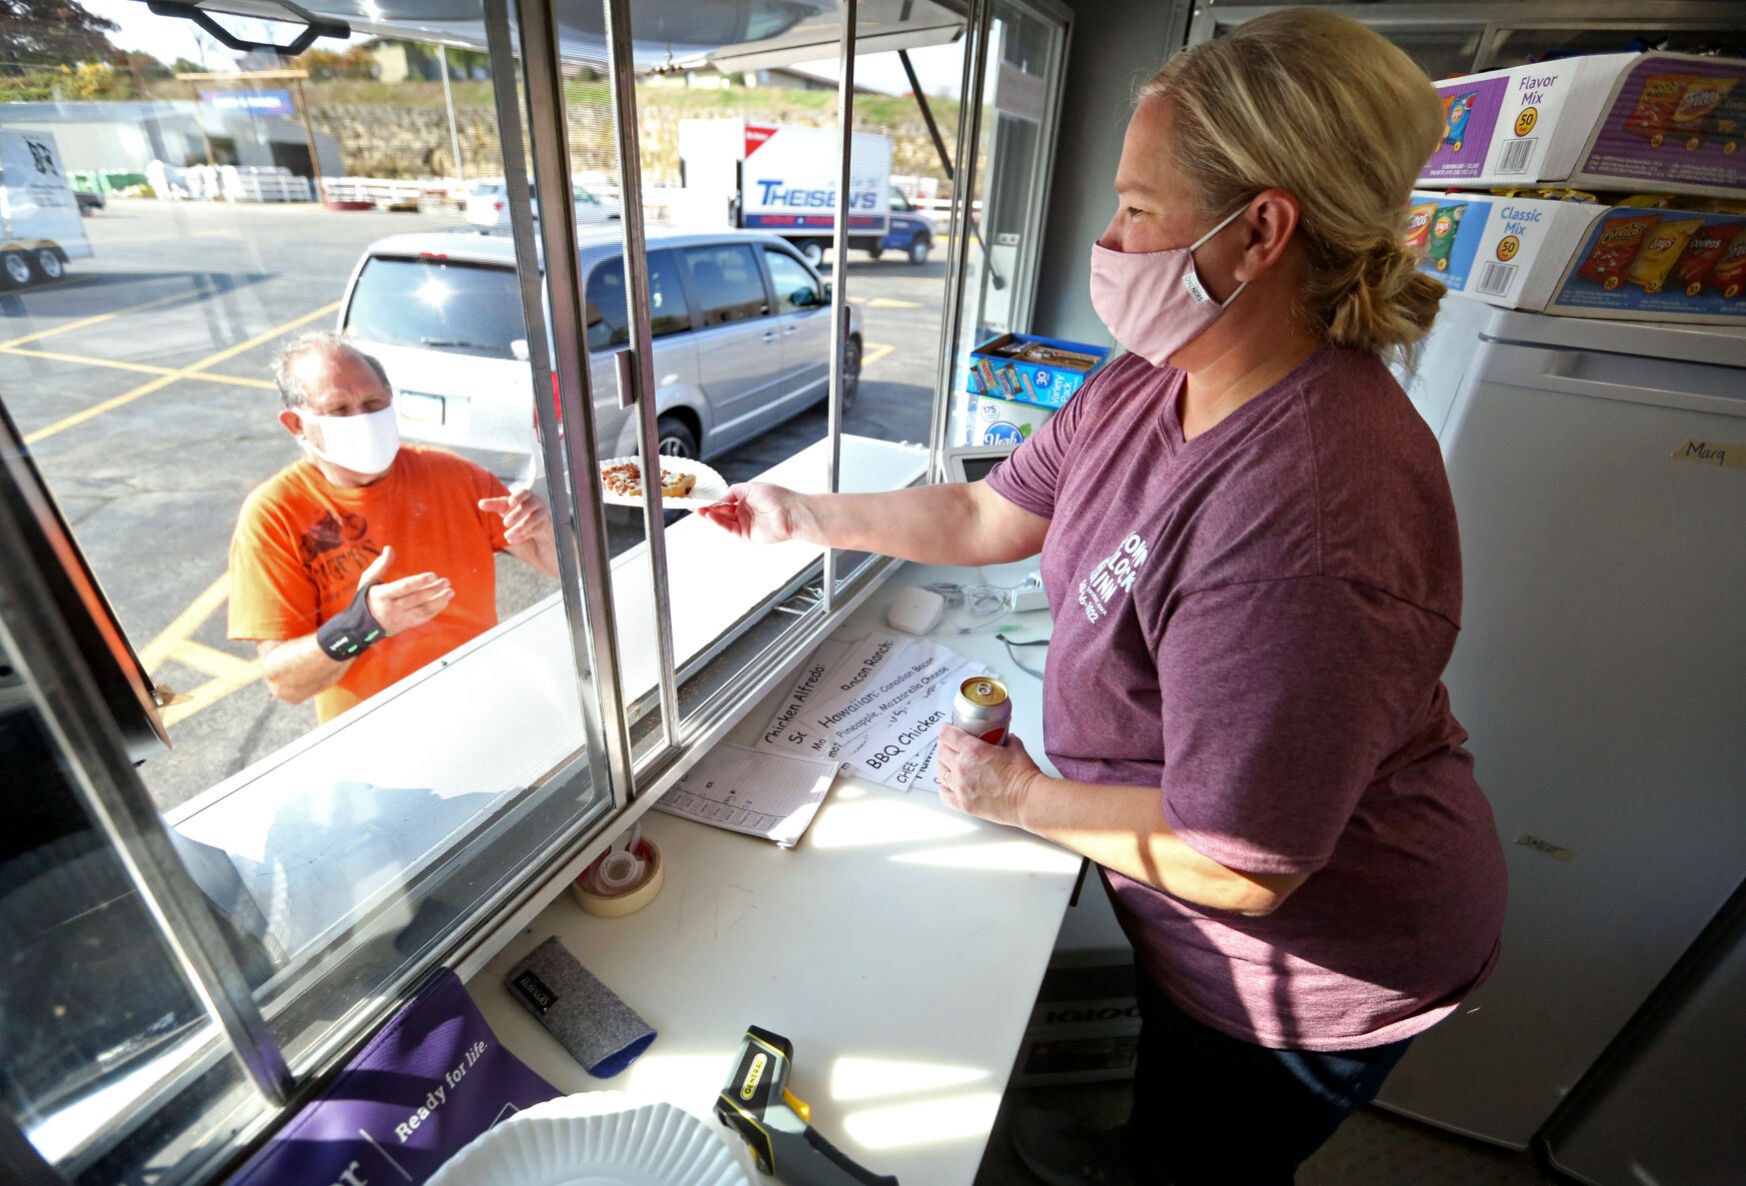 Town Clock Inn co-owner Irene Nelson serves pizza from a food truck at Theisen’s Home-Farm-Auto in Dubuque on Sunday. The longtime downtown restaurant is taking its business to customers as the pandemic drags on. PHOTO CREDIT: JESSICA REILLY